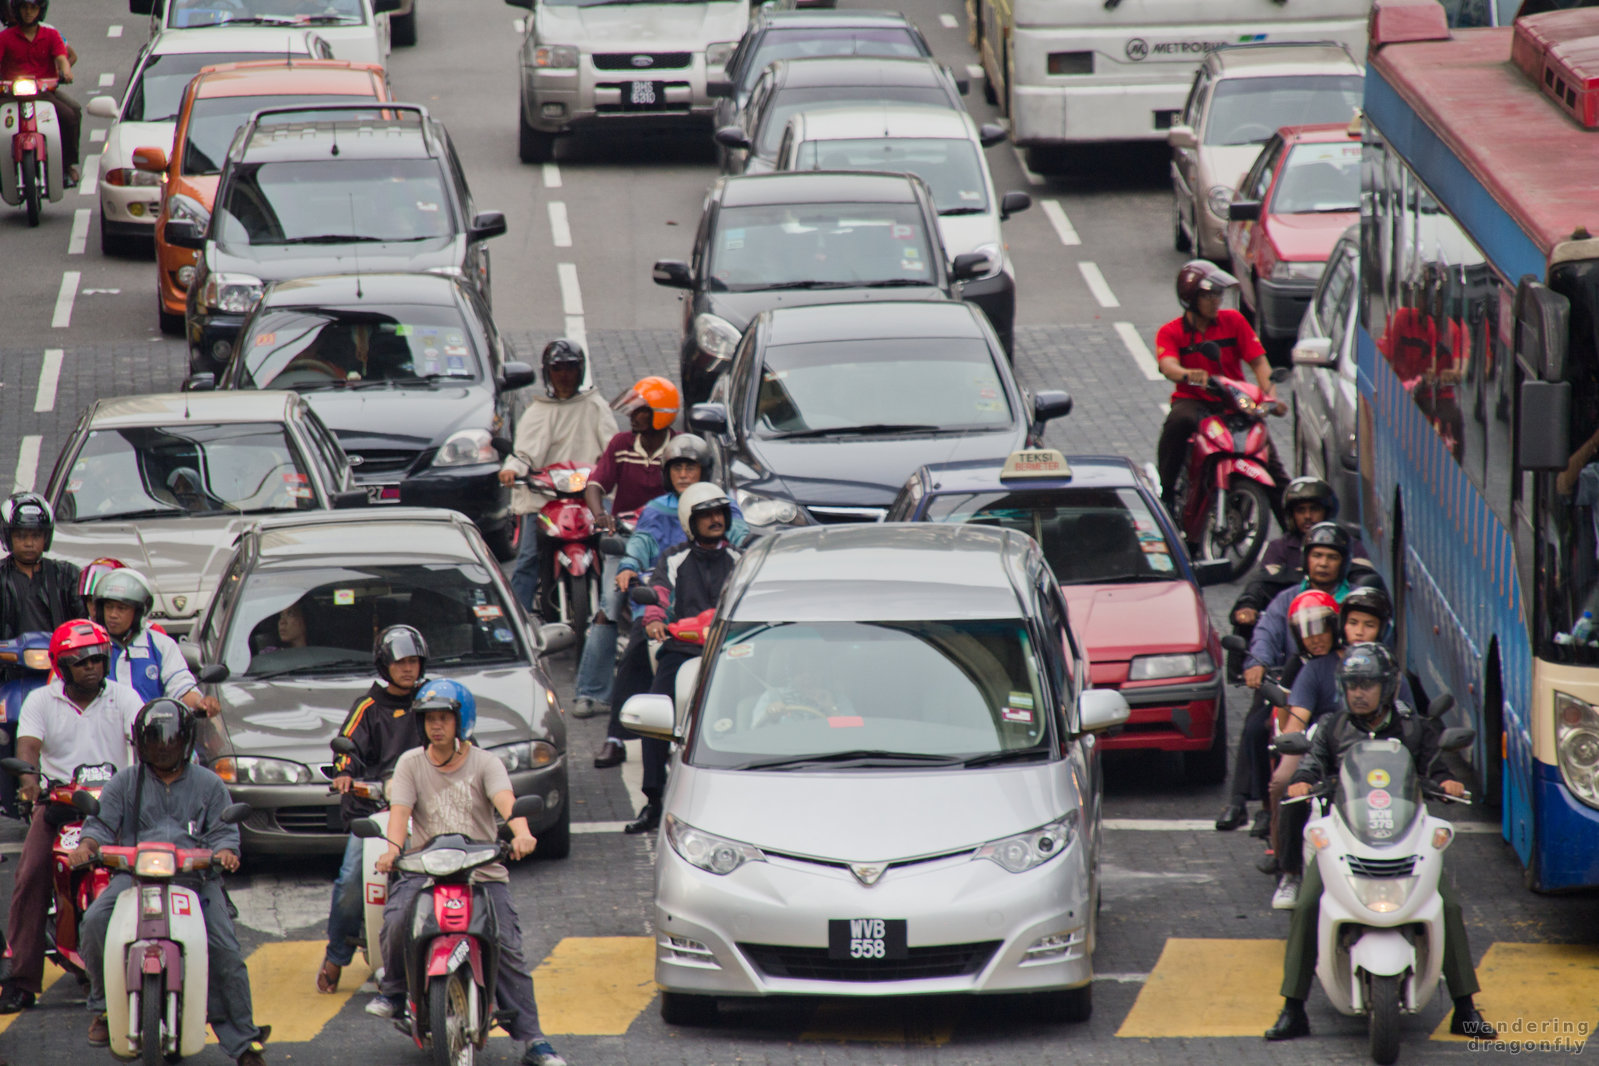 Lanes are for guidance only -- car, motorbike, traffic jam